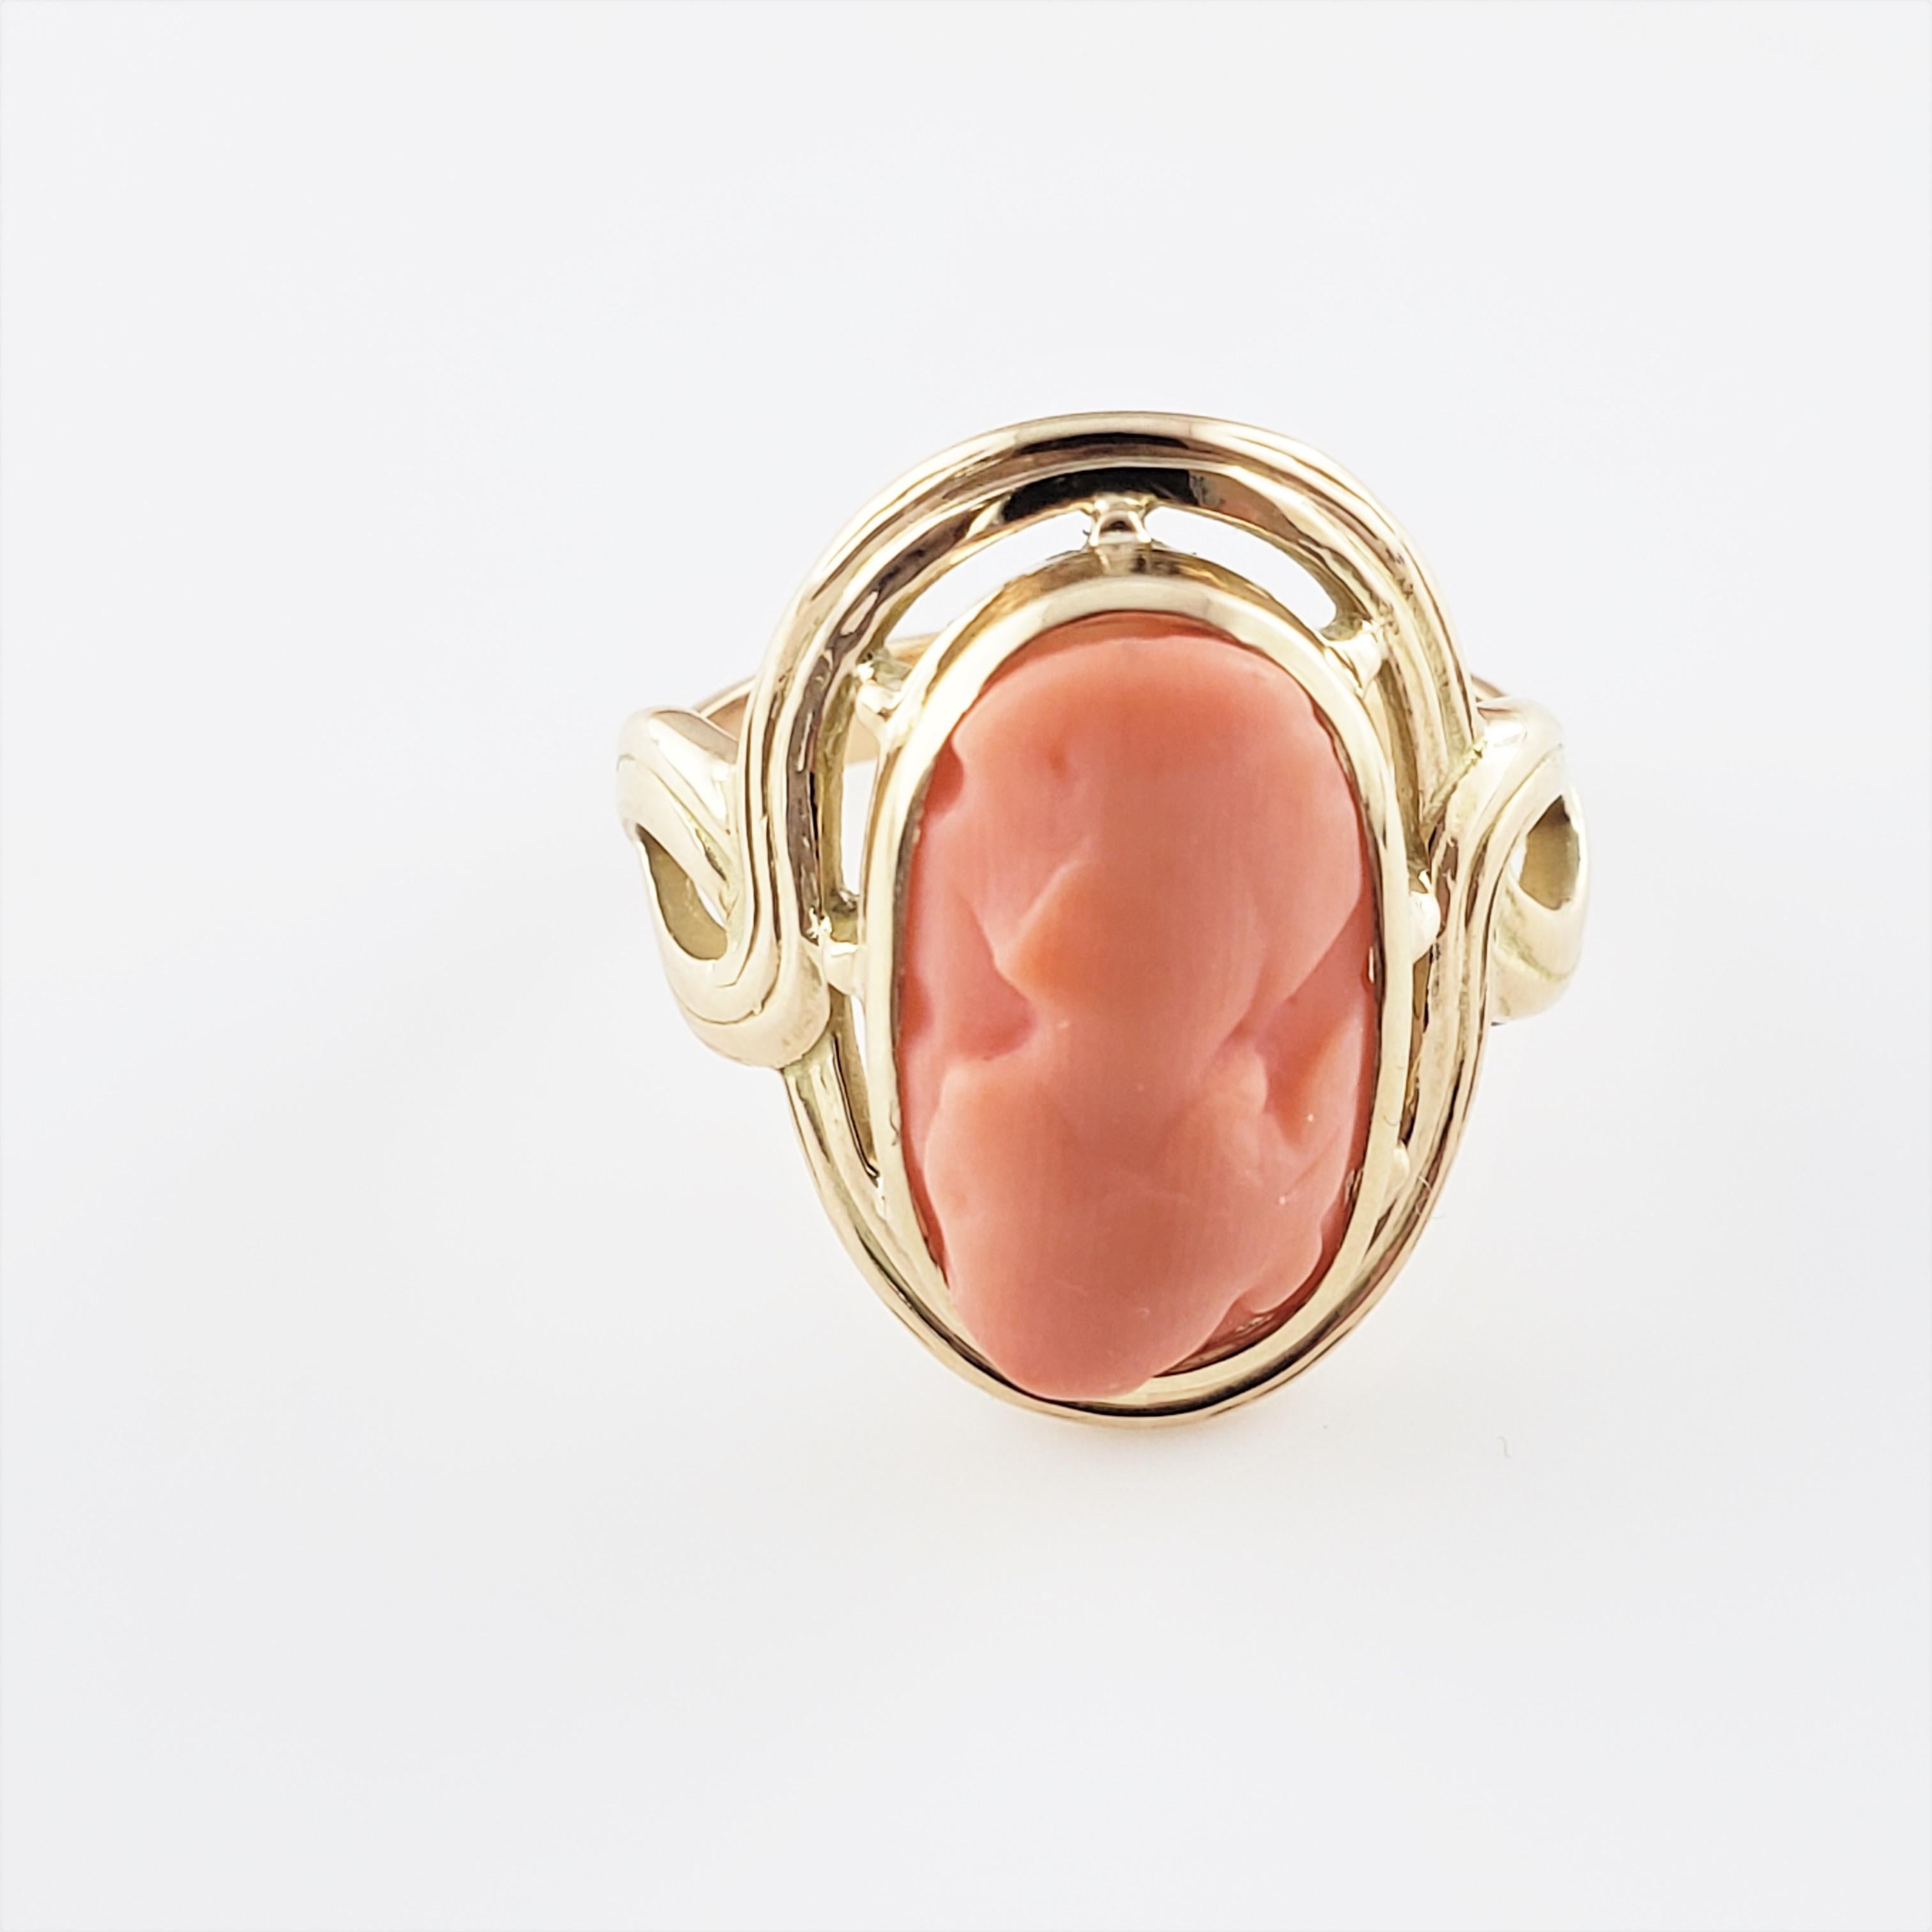 14 Karat Yellow Gold Coral Cameo Ring Size 4.75-

This lovely cameo ring features carved coral set in beautifully detailed 14K yellow gold.  Top of ring measures 18 mm x 15 mm.  Shank measures 2.5 mm.

Ring Size:  4.75

Weight:   2.8 dwt. / 4.5